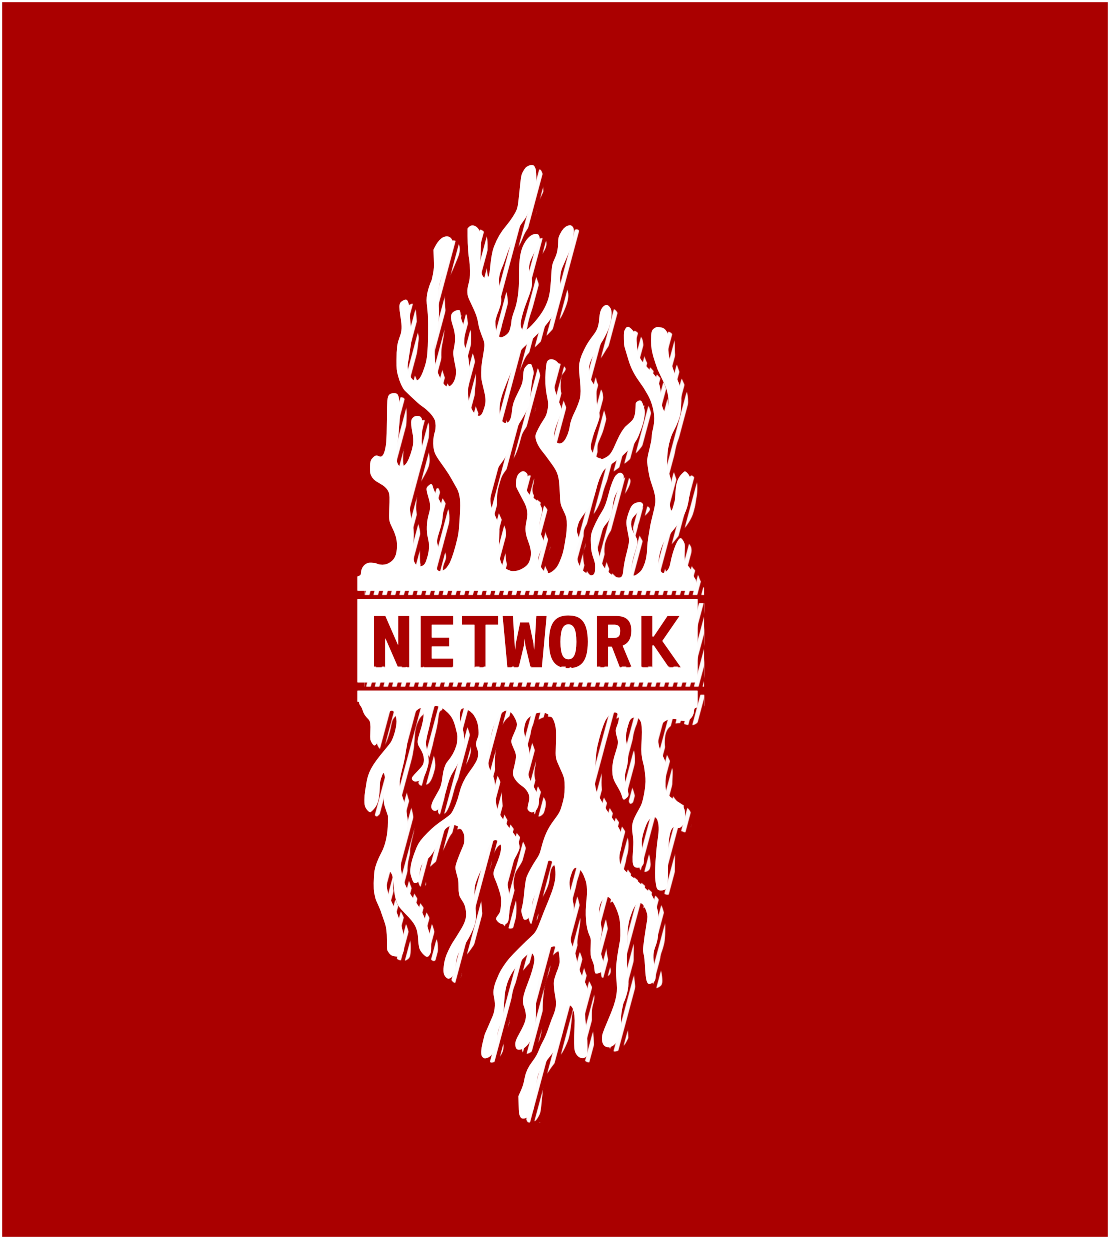 Making NETWORK with Inkscape